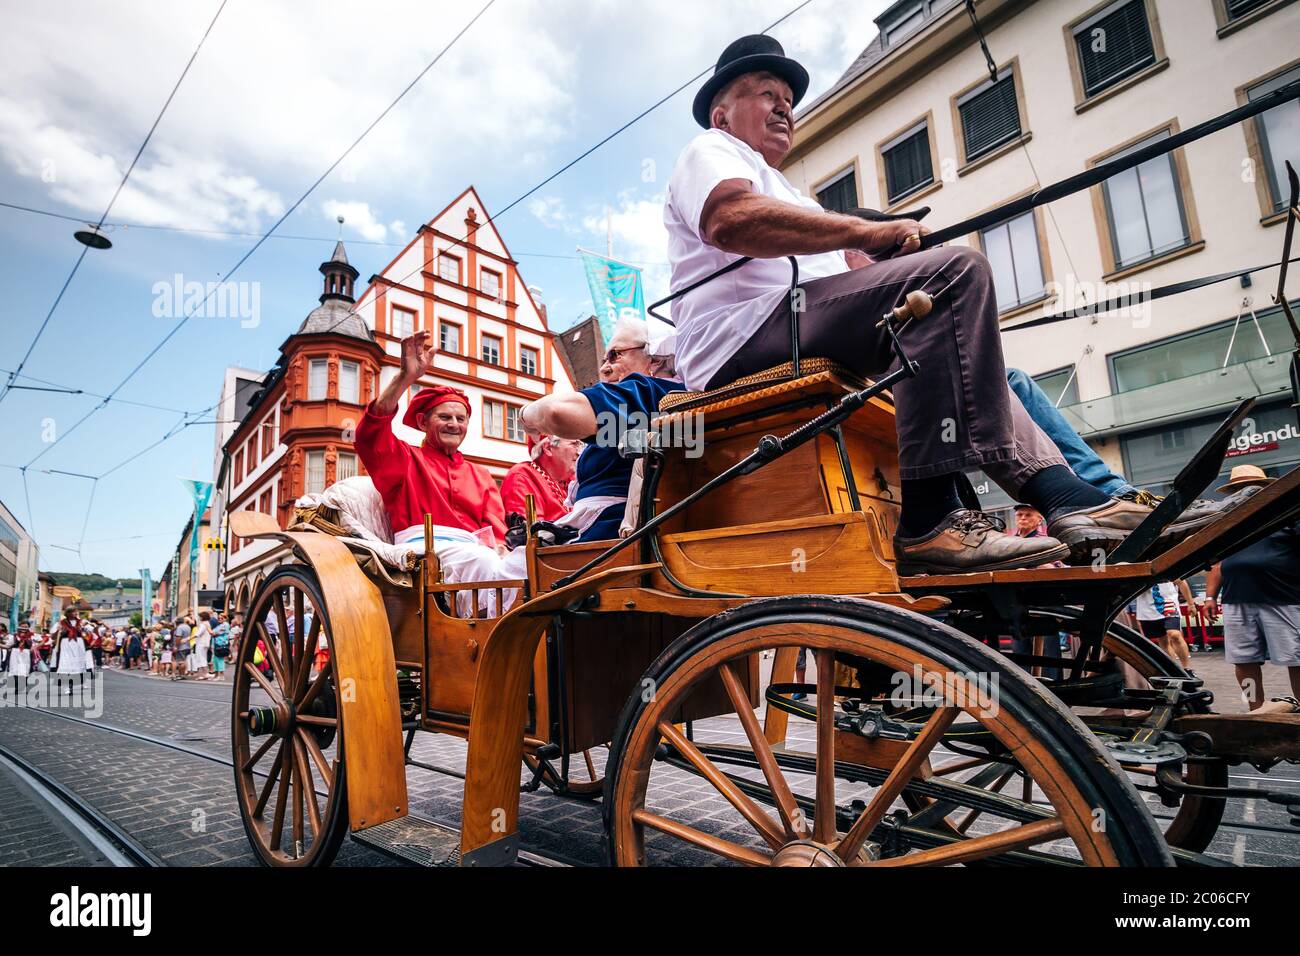 Traditional horse-drawn carriage with happy people at the summer festival opening parade. Kiliani is a 2-weeks-long folk festival with brass music. Stock Photo